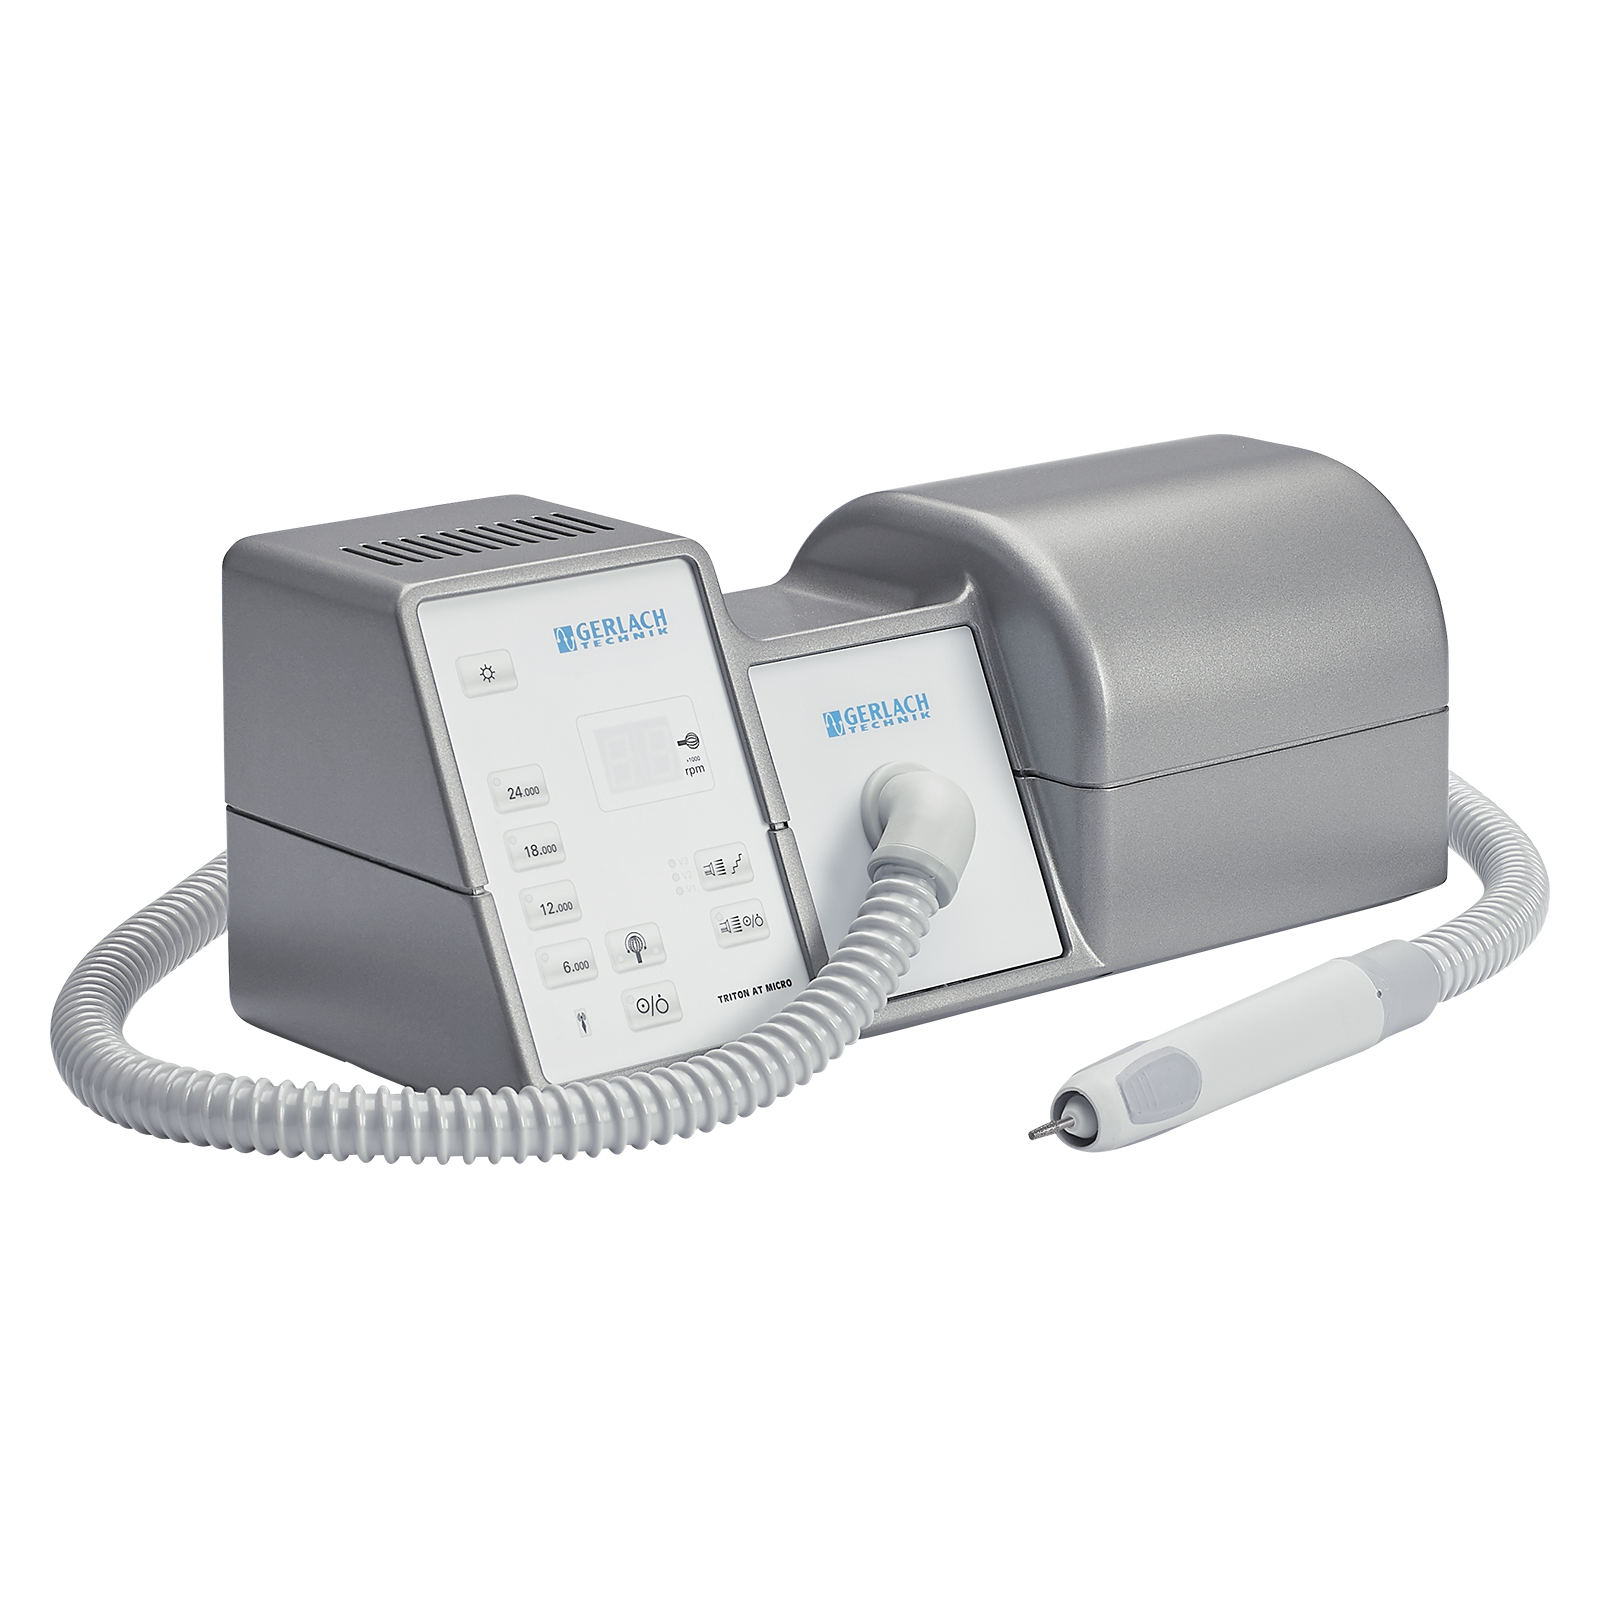 GERLACH foot care suction device TRITON AT MICRO platinum silver